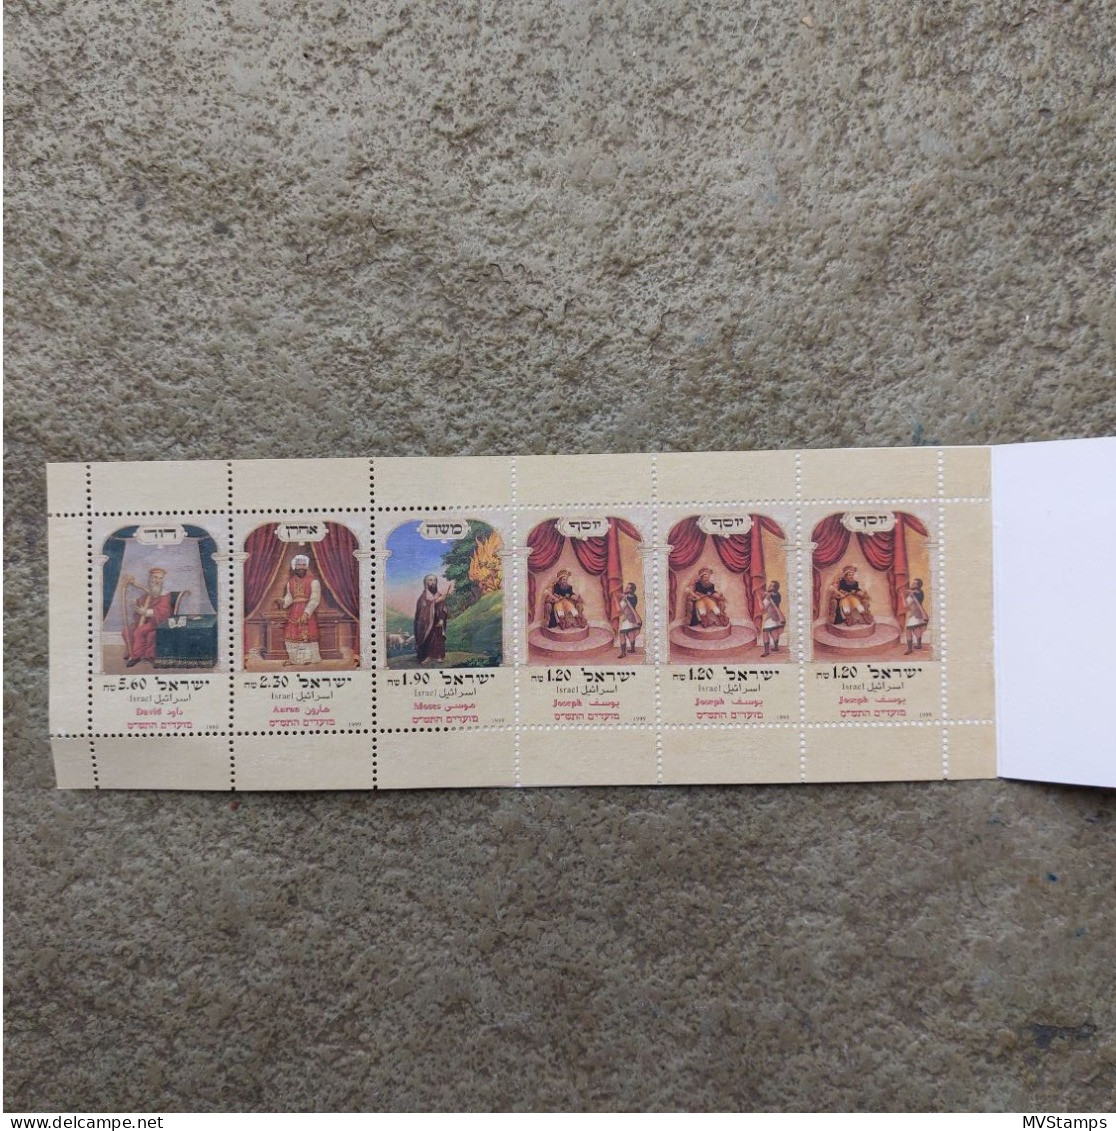 Israel 1999 Booklet Festival Stamps (Michel MH 34) Nice MNH - Libretti